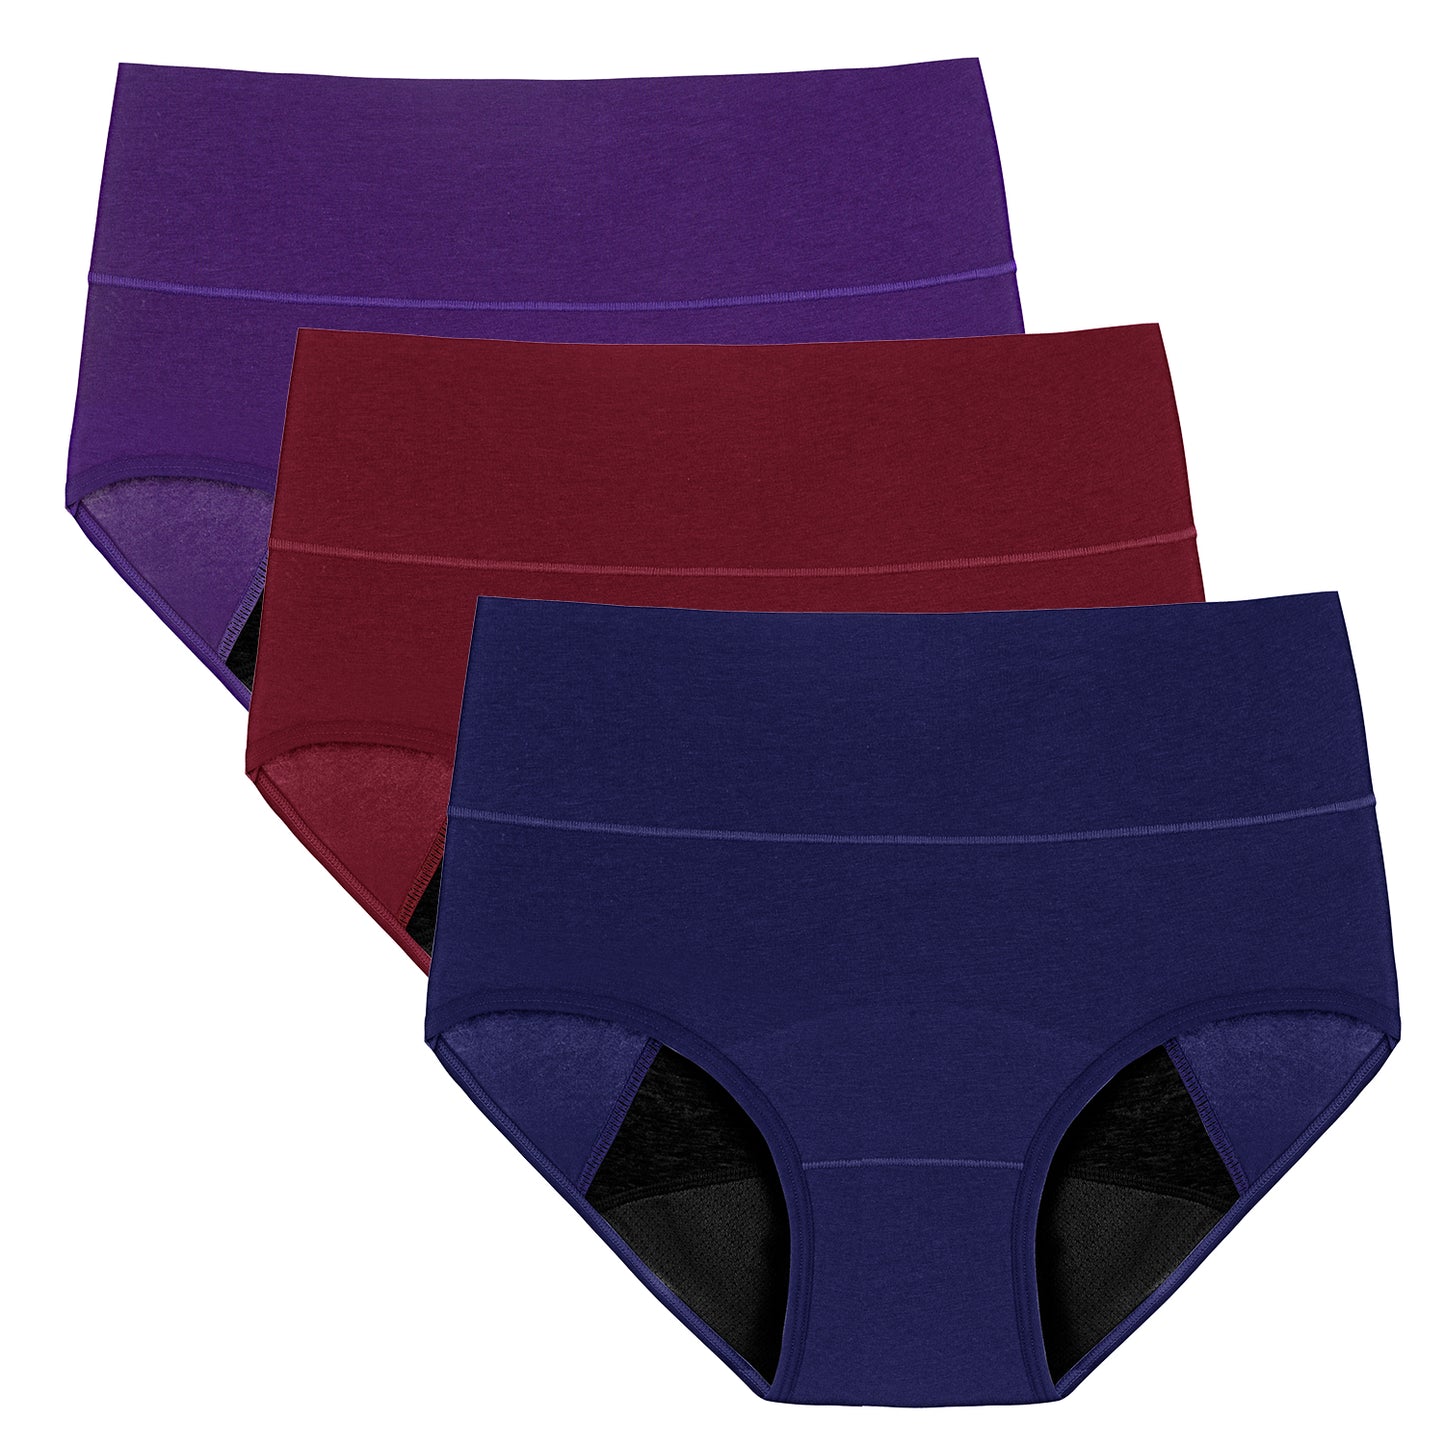  Molasus Incontinence Underwear For Women Heavy Flow